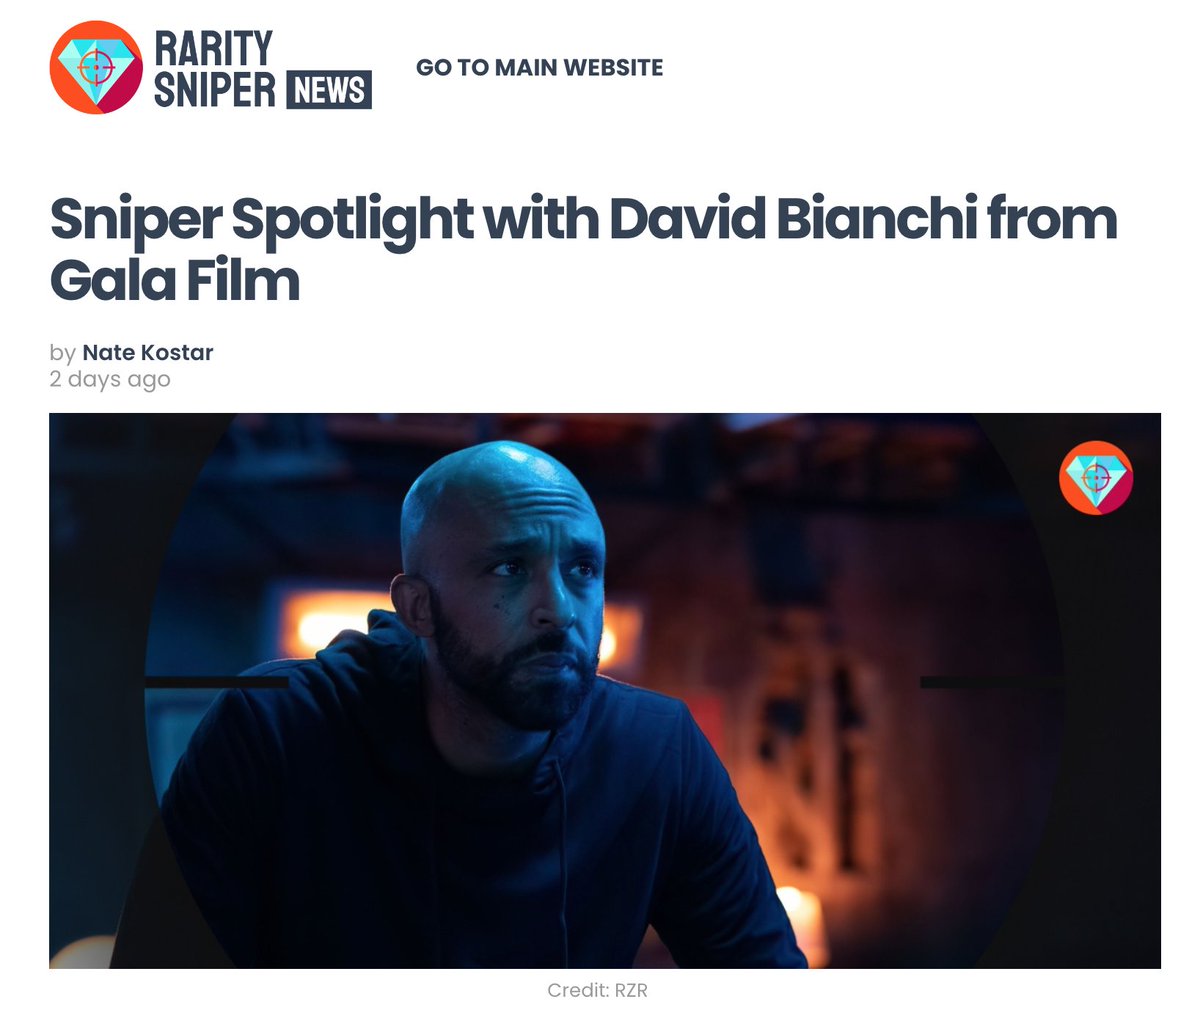 THANK YOU @RaritySniperNFT for the spotlight! @RZRseries @GoGalaFilms #RZRseries 👀⬇️Enjoy a solid look into my life and process! raritysniper.com/news/sniper-sp…